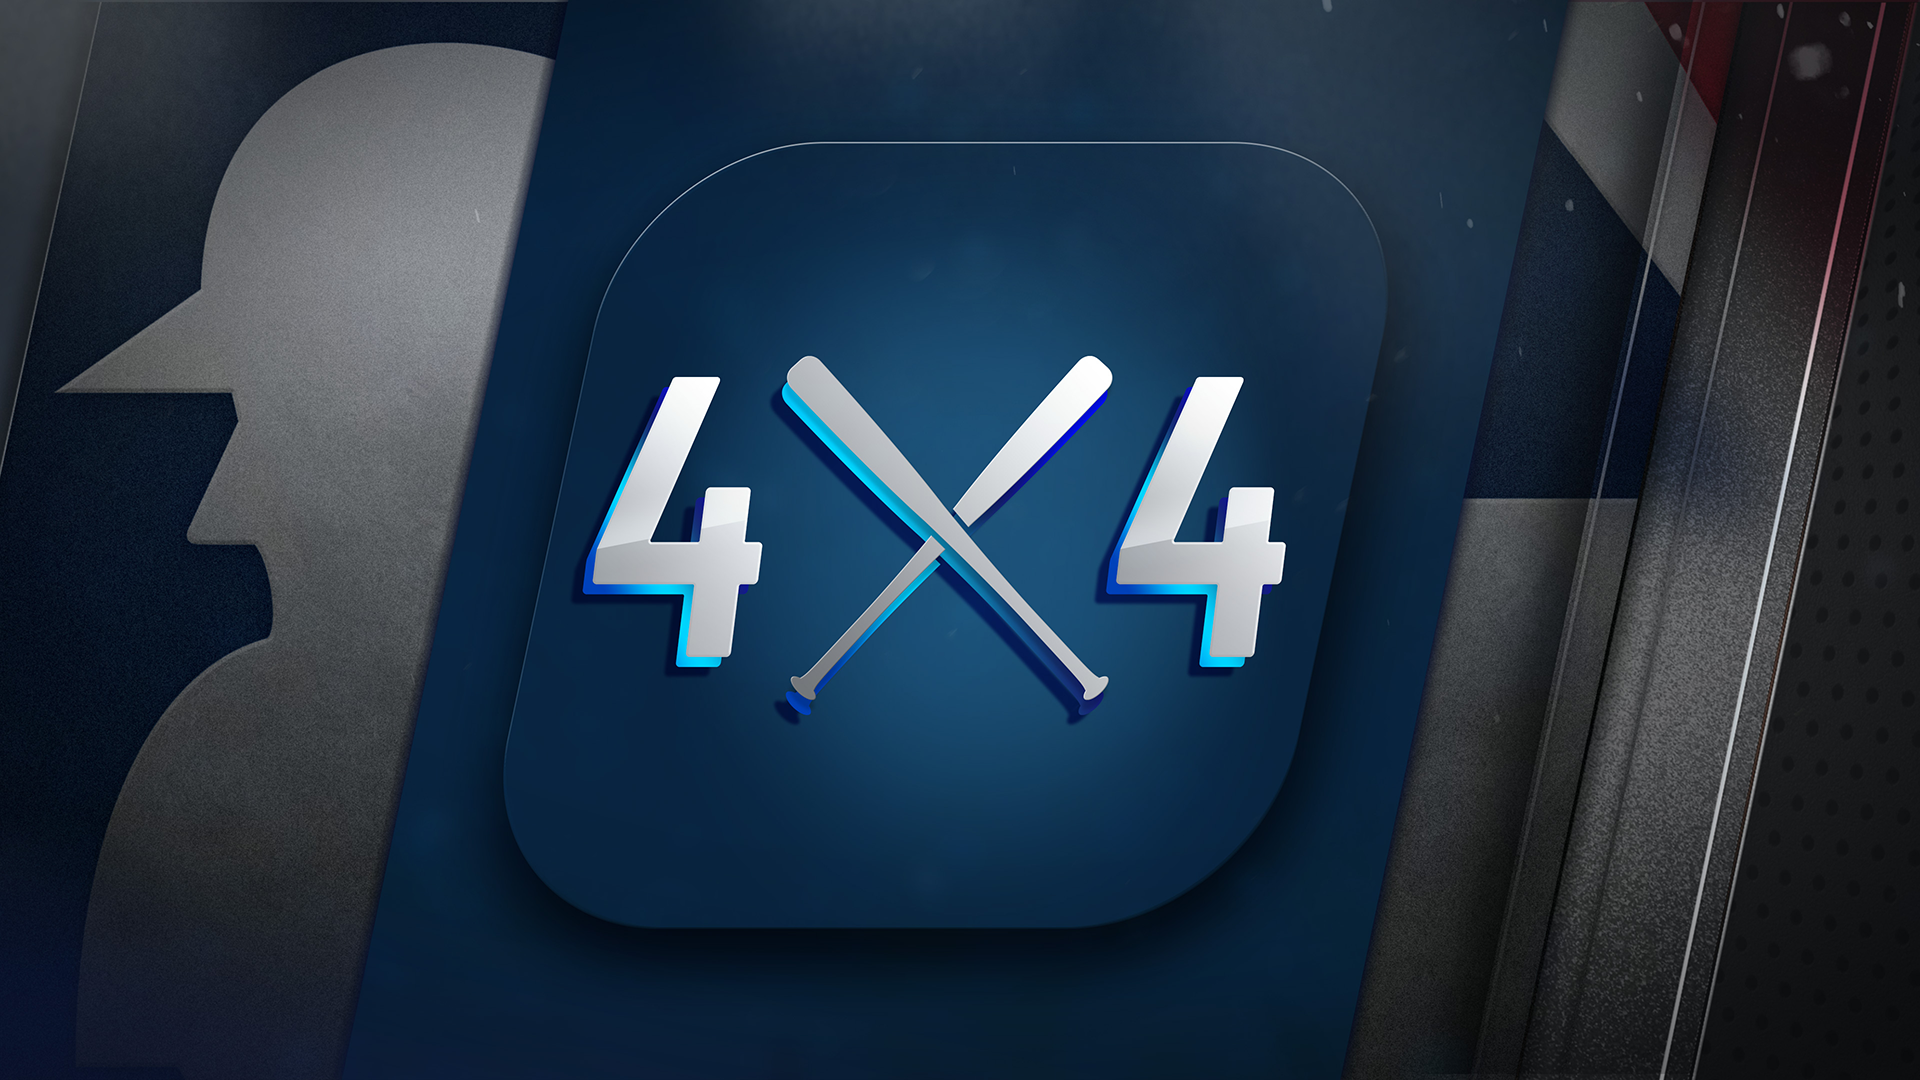 Icon for 4 X 4